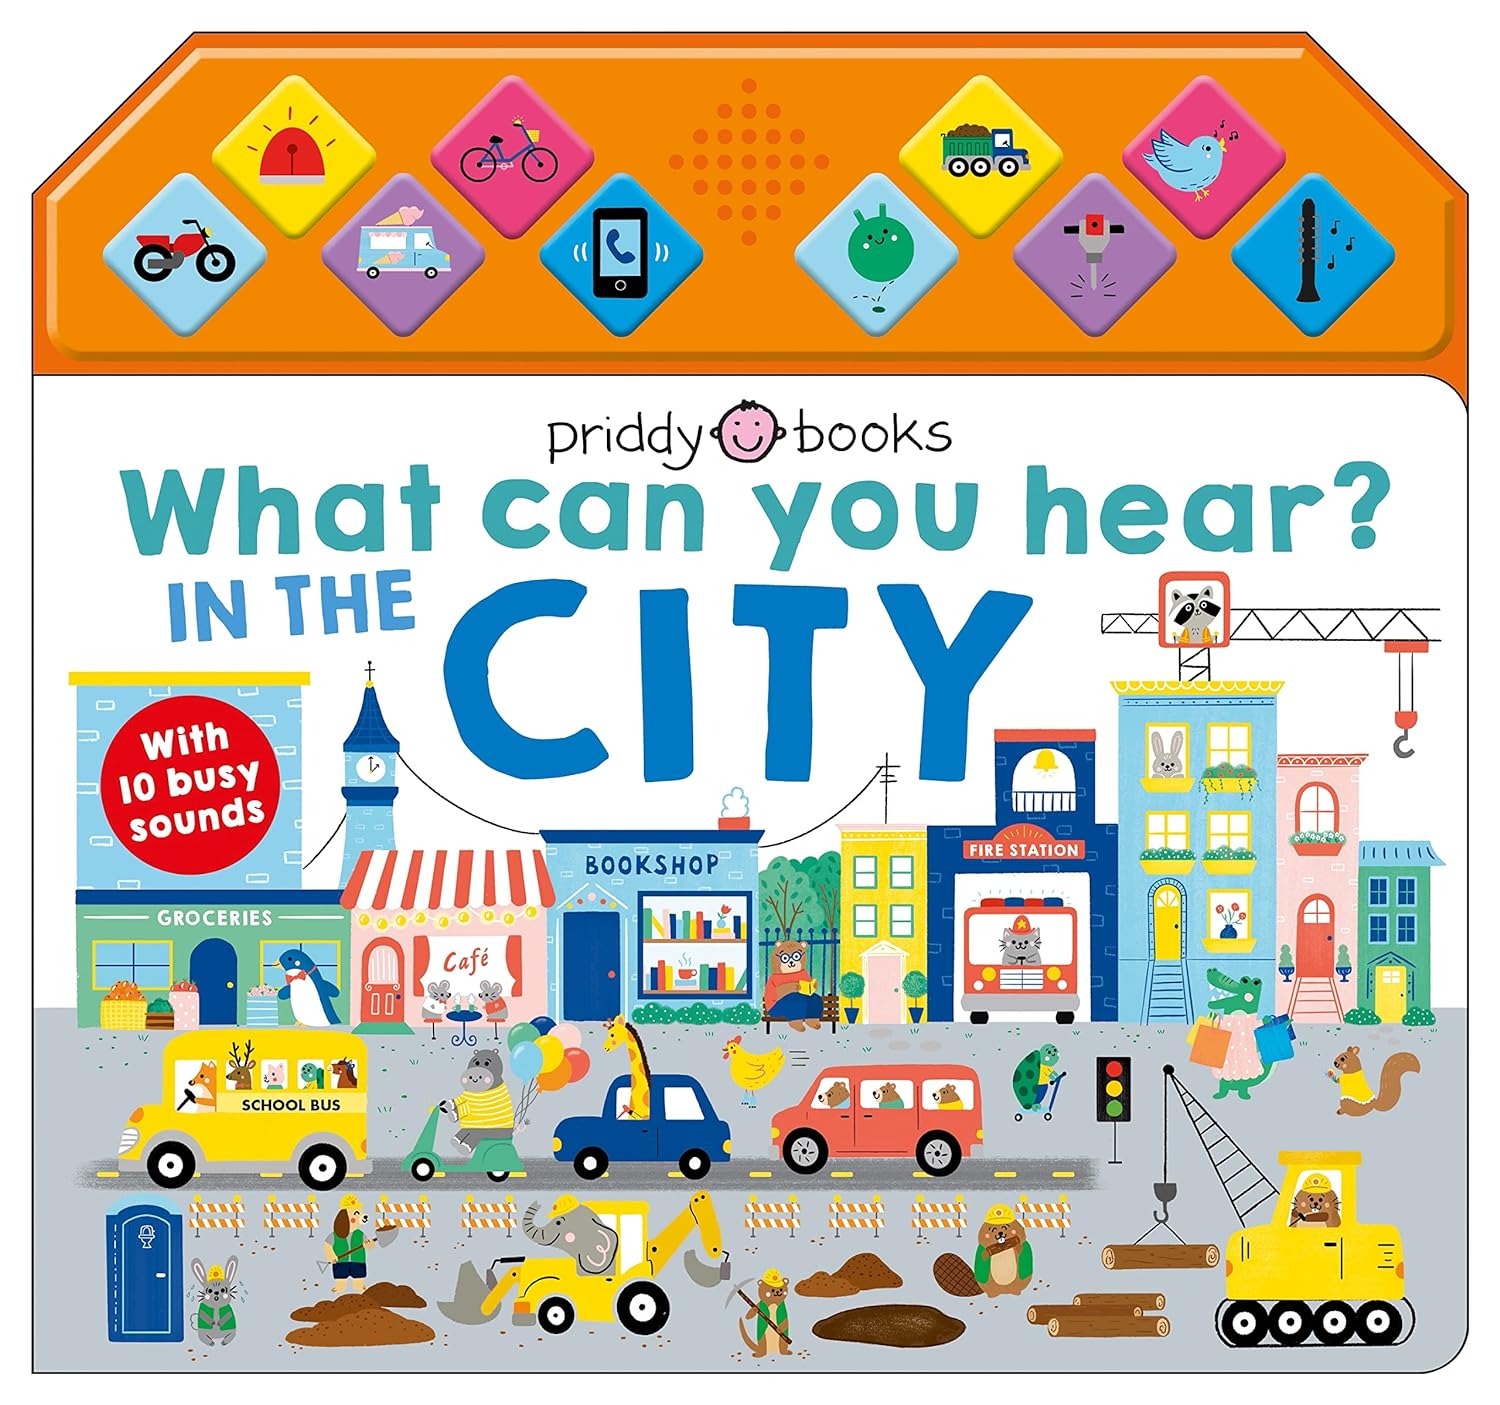 WHAT CAN YOU HEAR IN THE CITY?